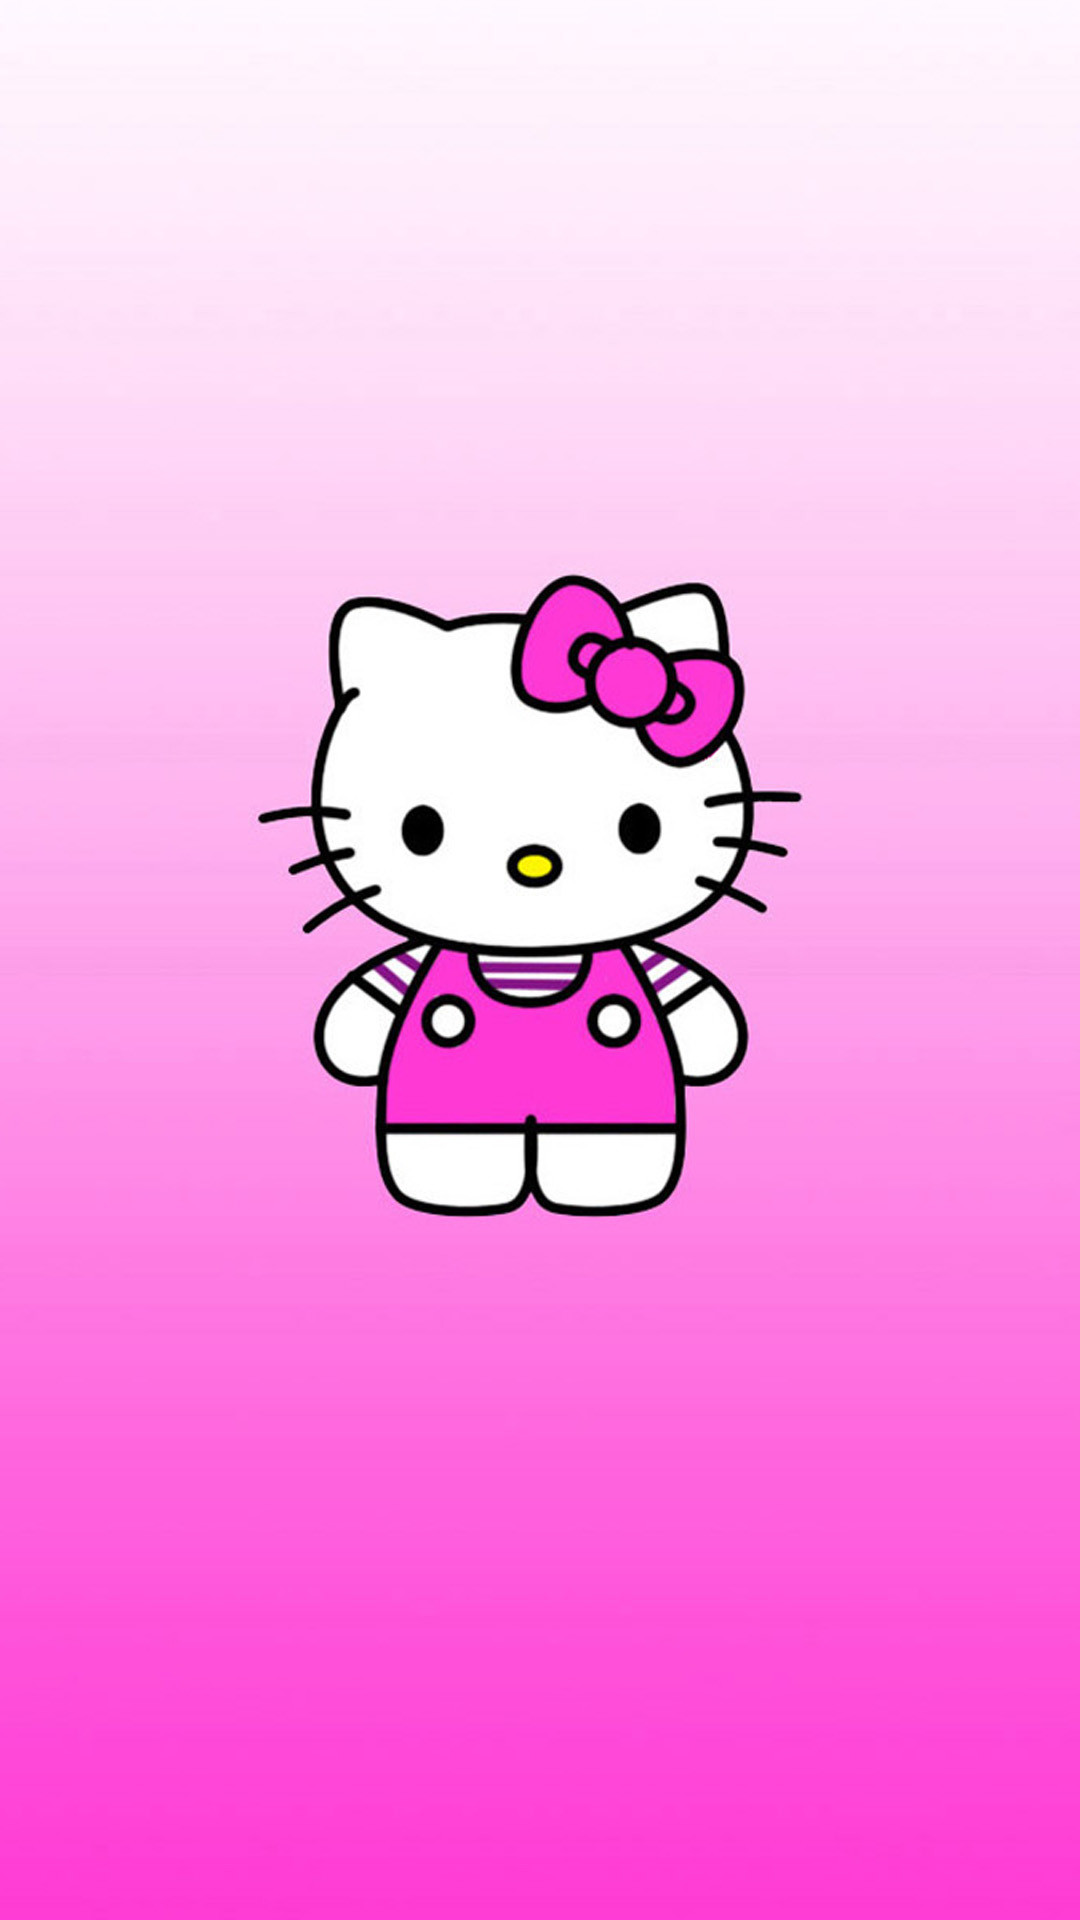 File attachment for Apple iPhone 6 Plus HD Wallpaper – Hello Kitty Images